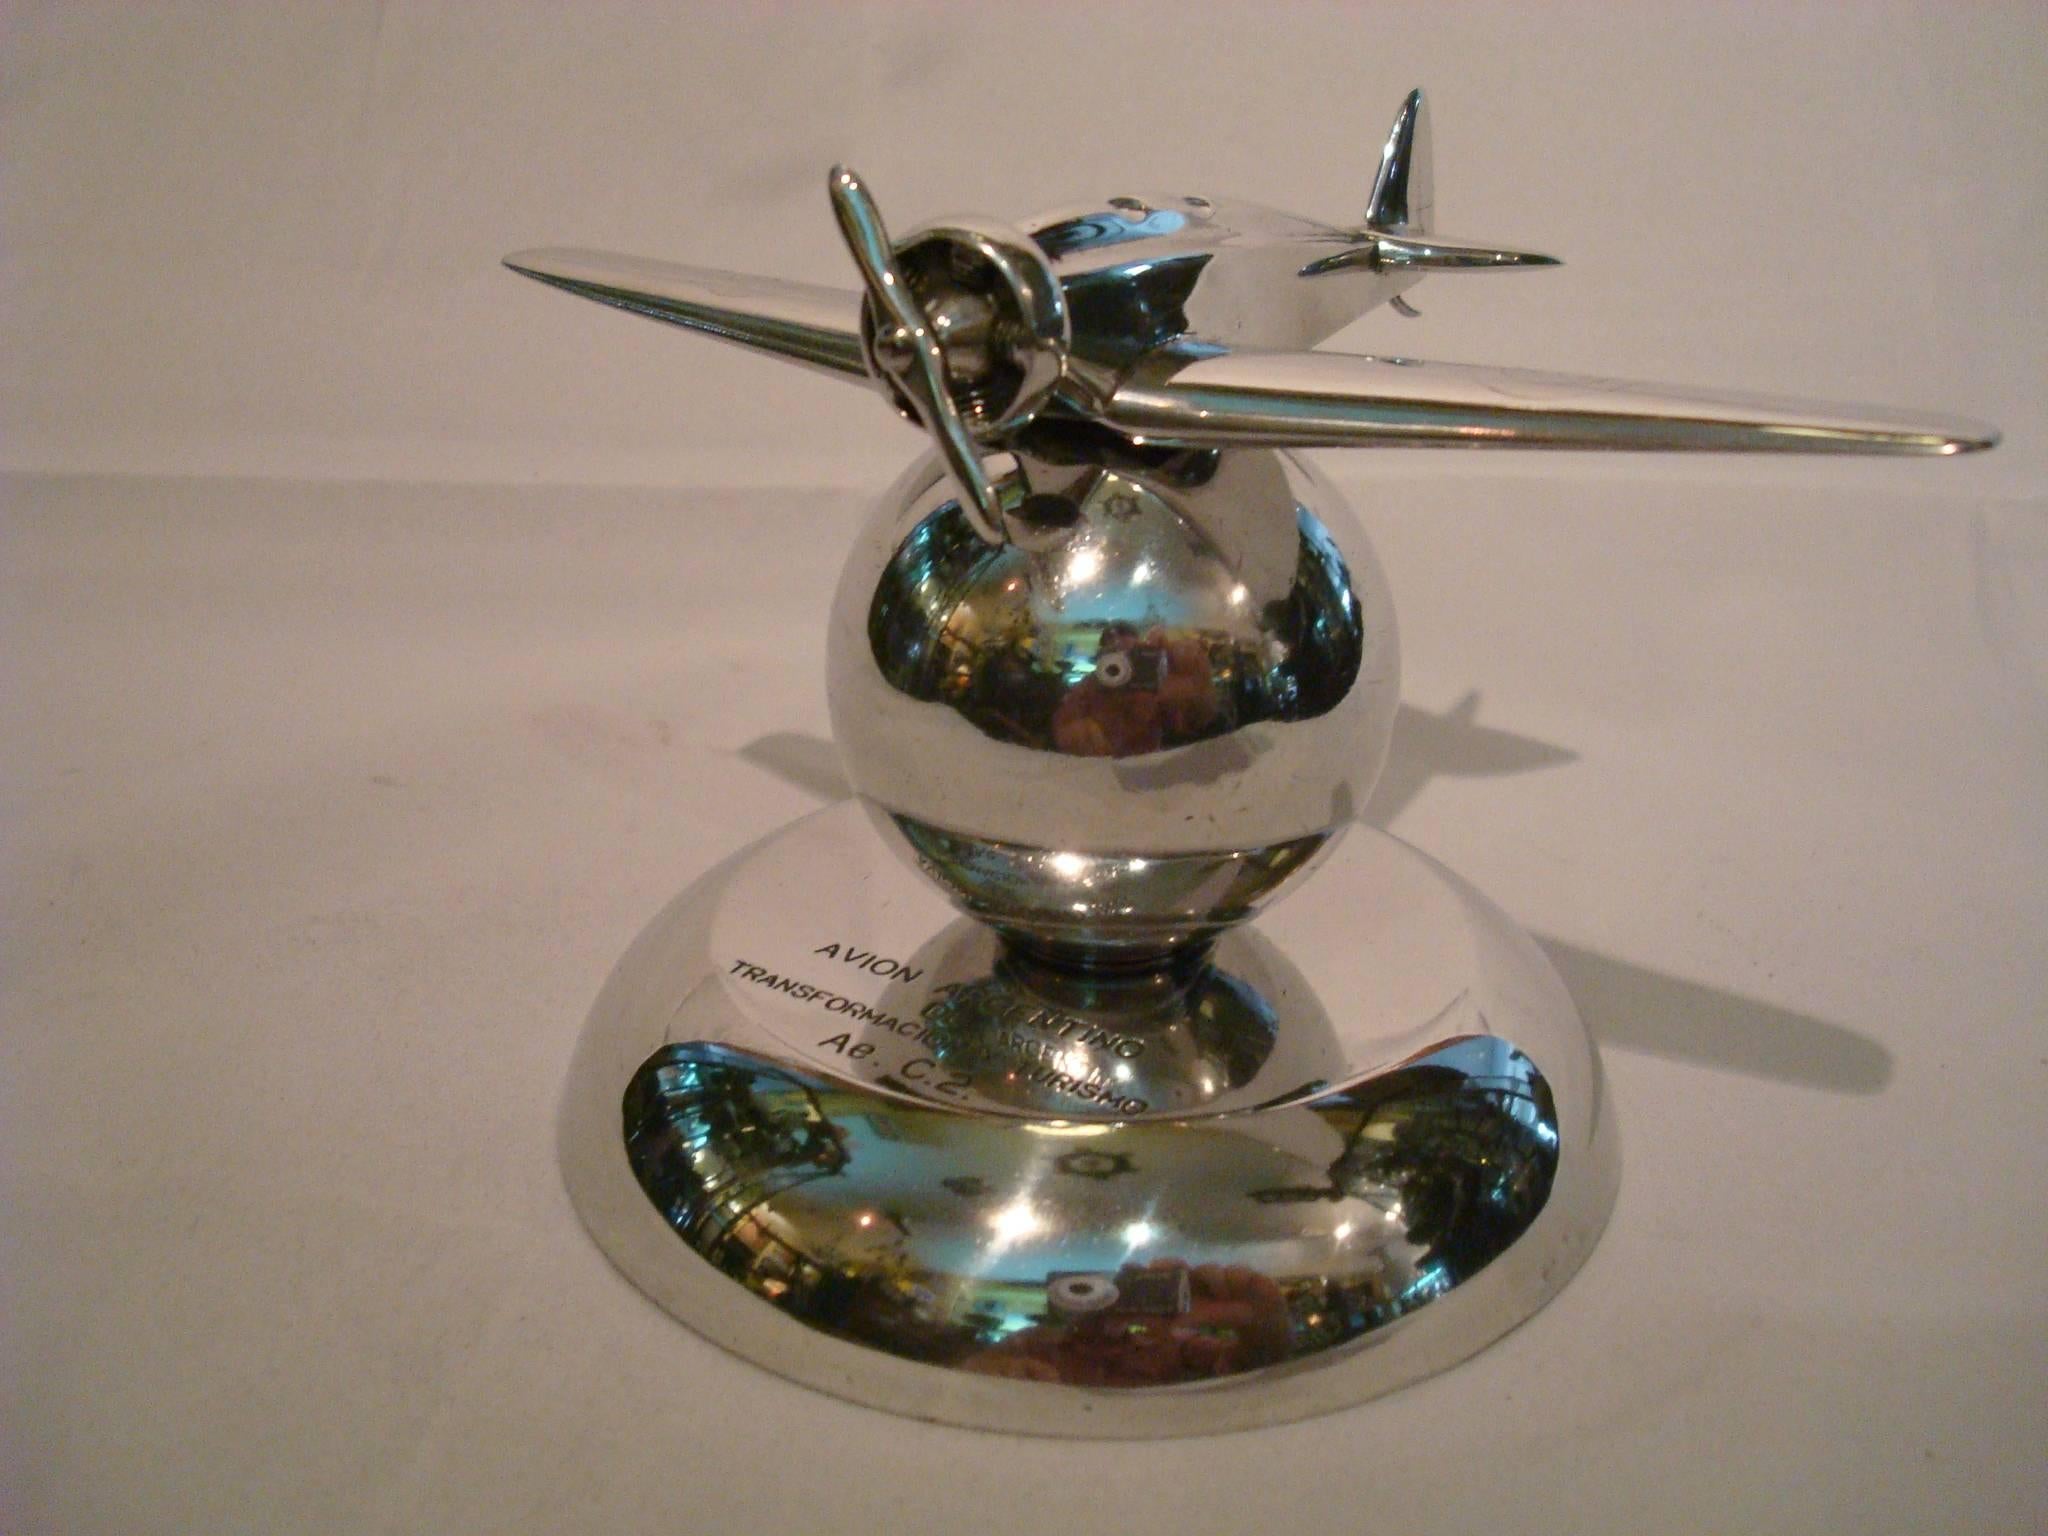 Polished Art Deco Airplane Fighter over the World Paperweight, 1930s